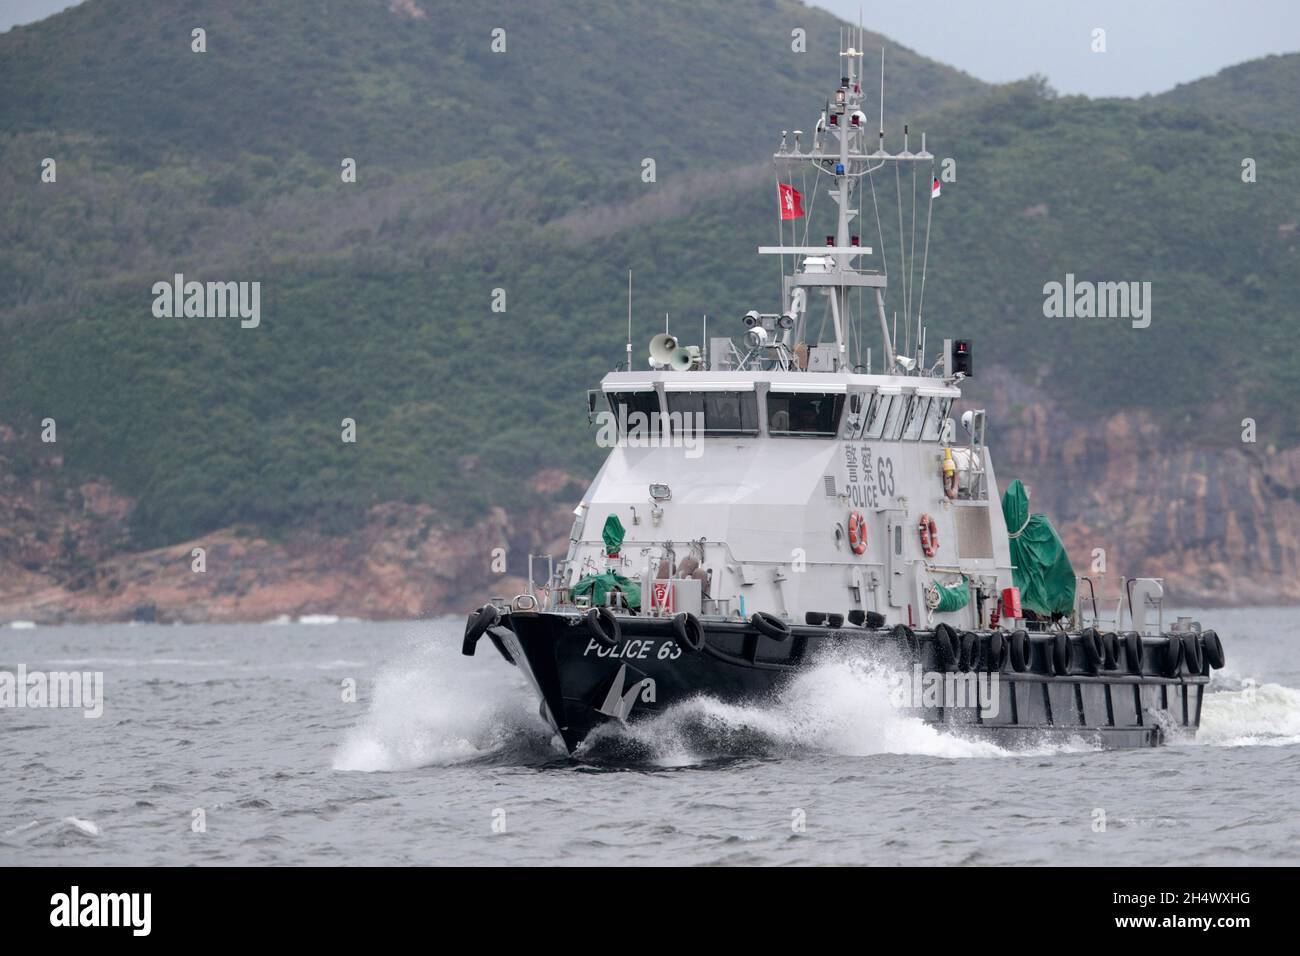 Police Launch 63, south of Aberdeen, Hong Kong 29th August 2021 Stock Photo